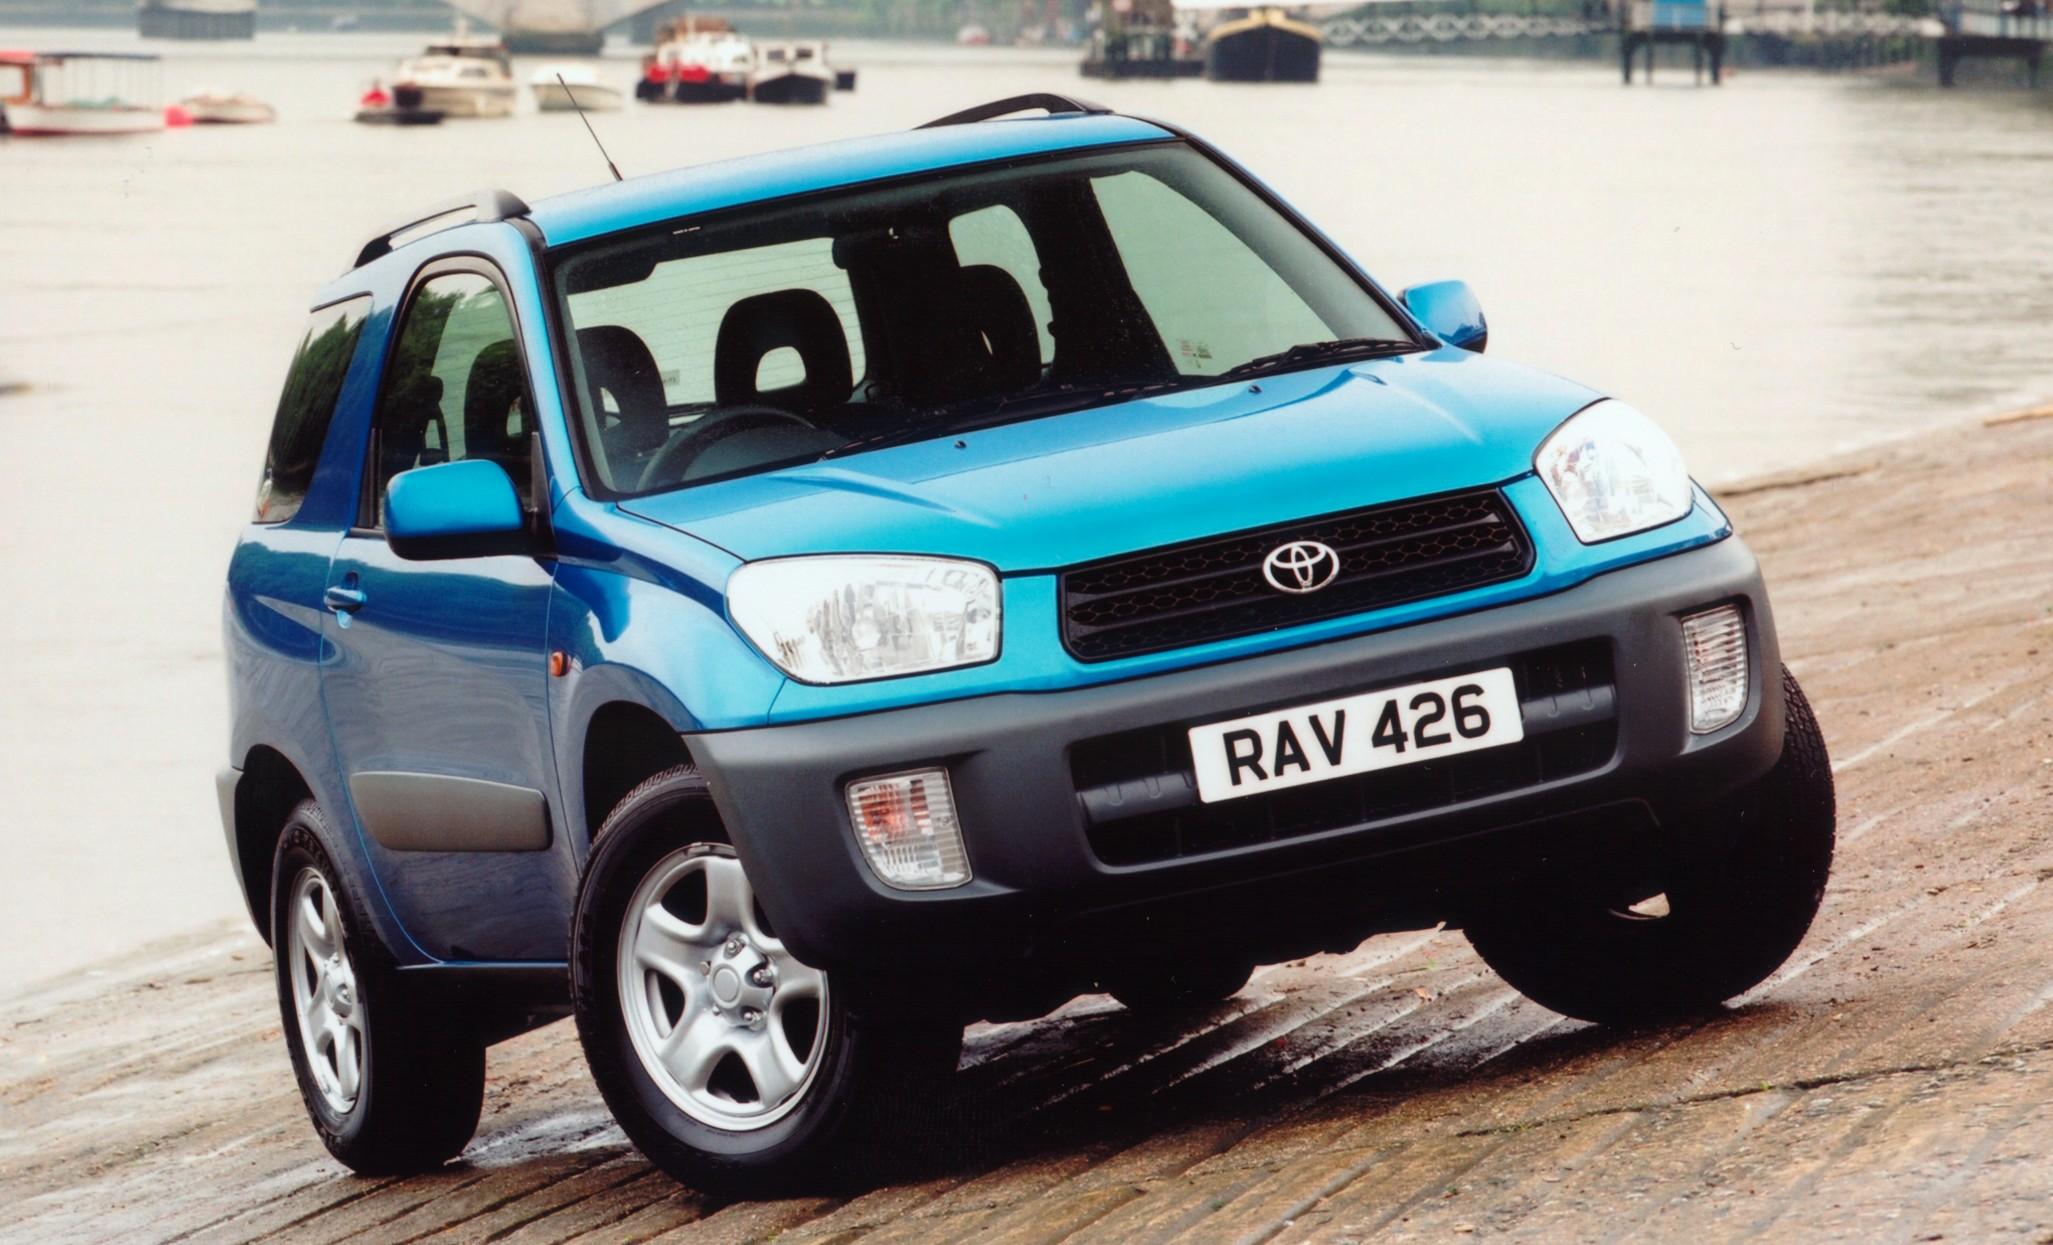 The RAV 4 brings the reassurance of four-wheel drive and superb reliability